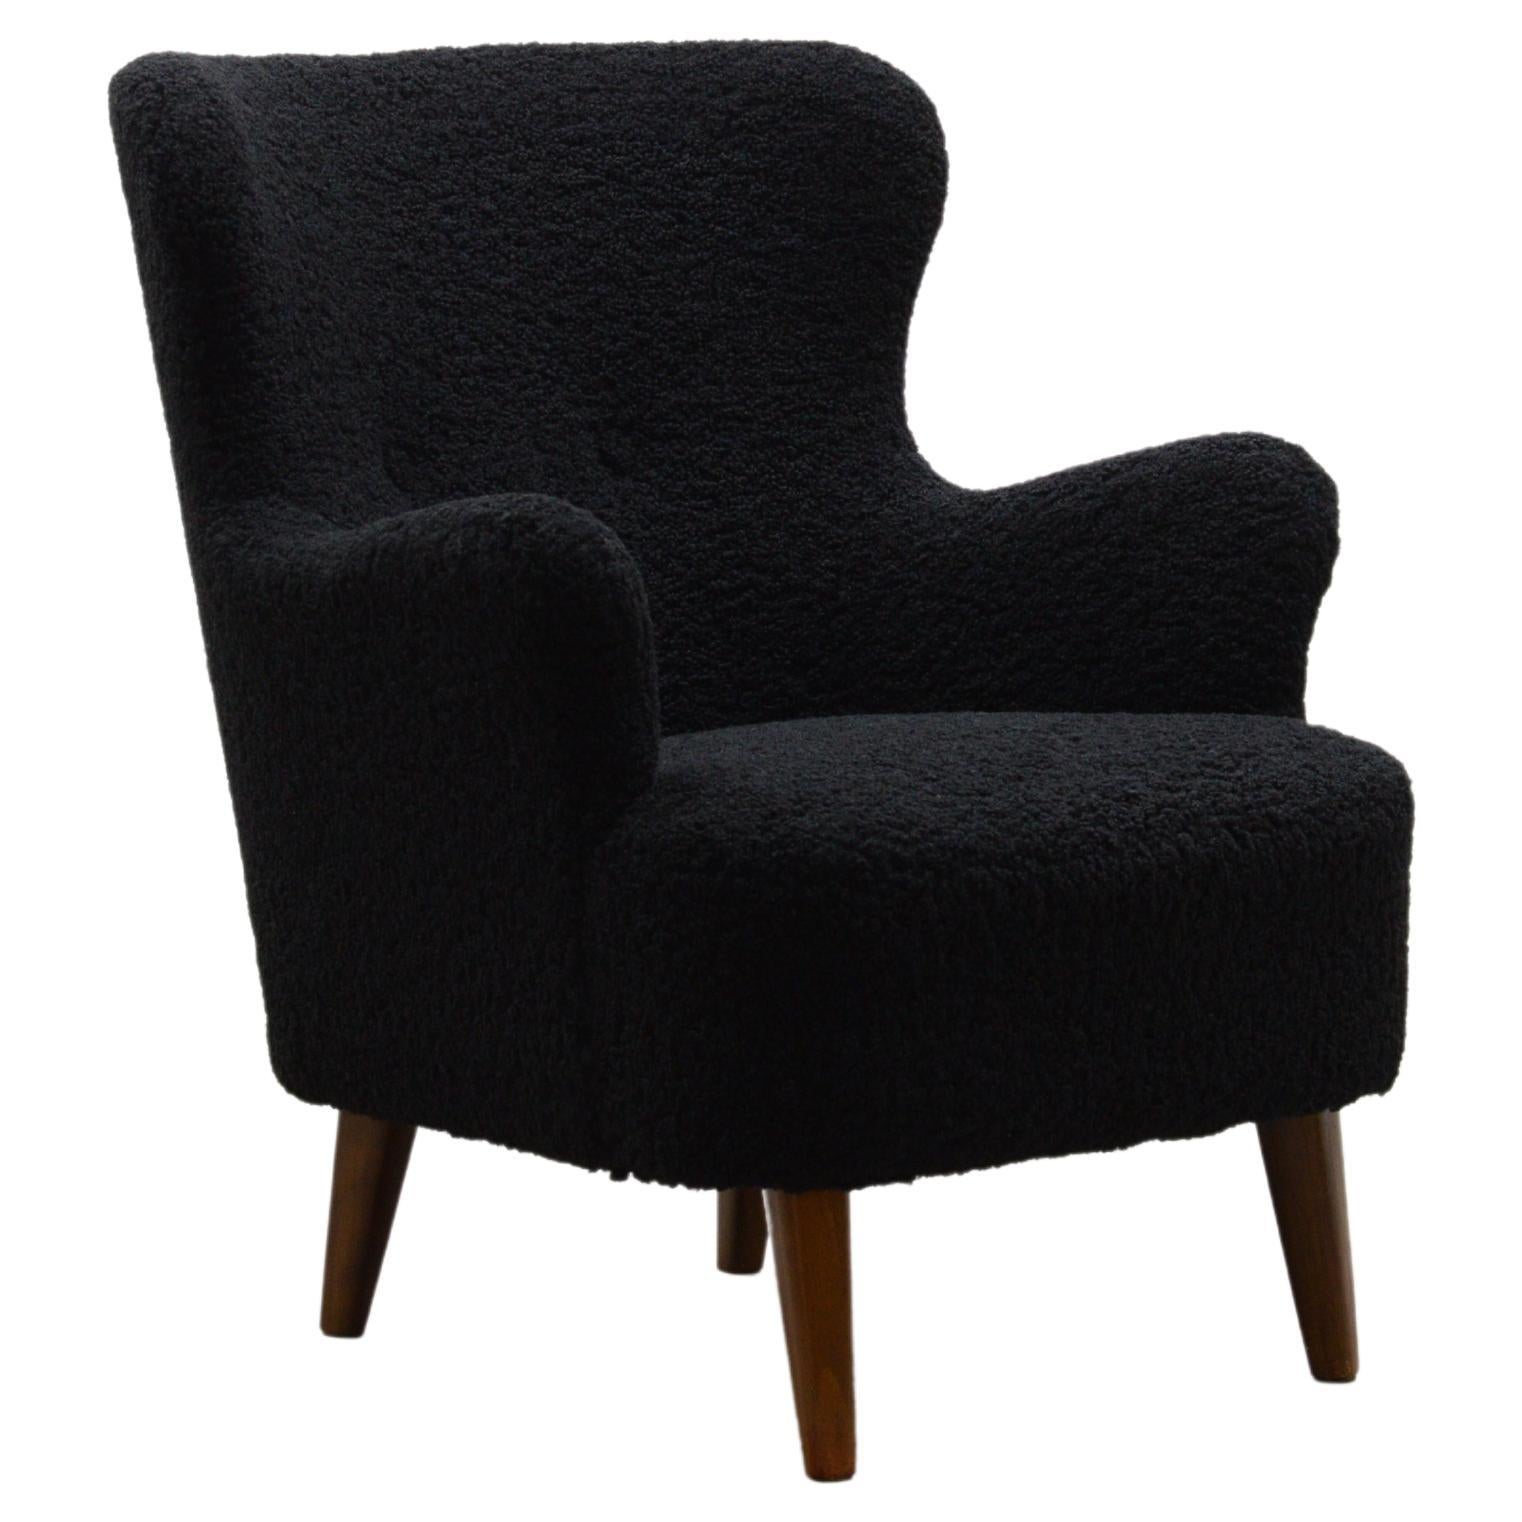 Wingback chair by Theo Ruth for Artifort, 50’s Netherlands. 